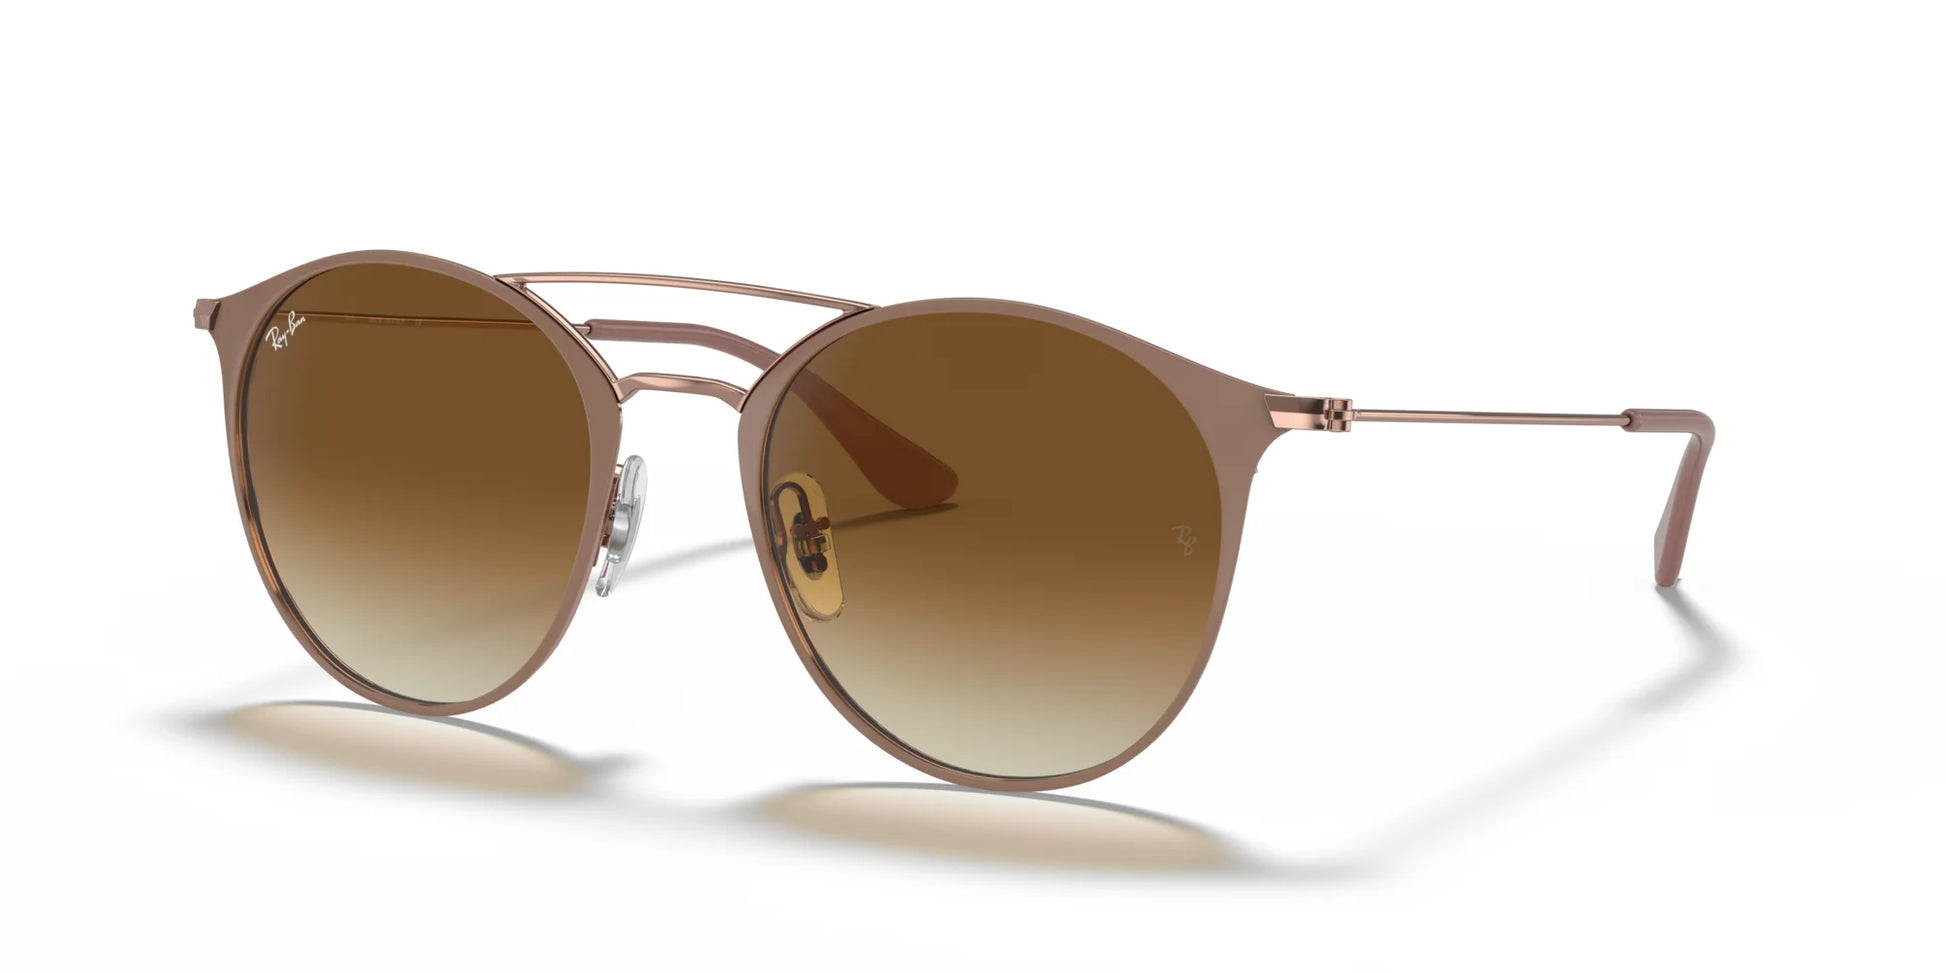 Ray-Ban RB3546 Sunglasses Beige On Copper / Light Brown Gradient